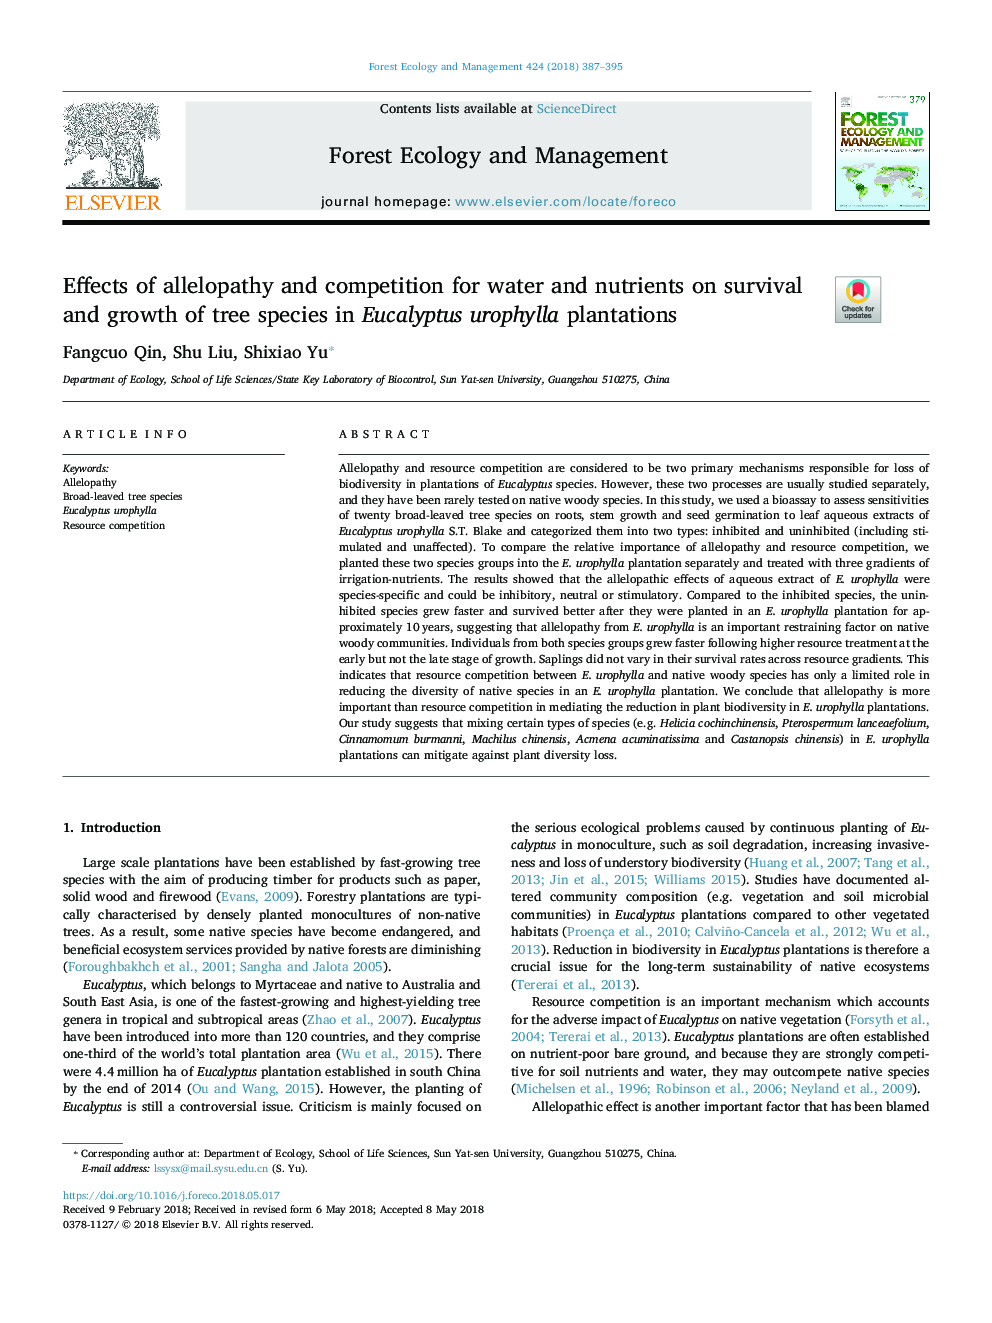 Effects of allelopathy and competition for water and nutrients on survival and growth of tree species in Eucalyptus urophylla plantations